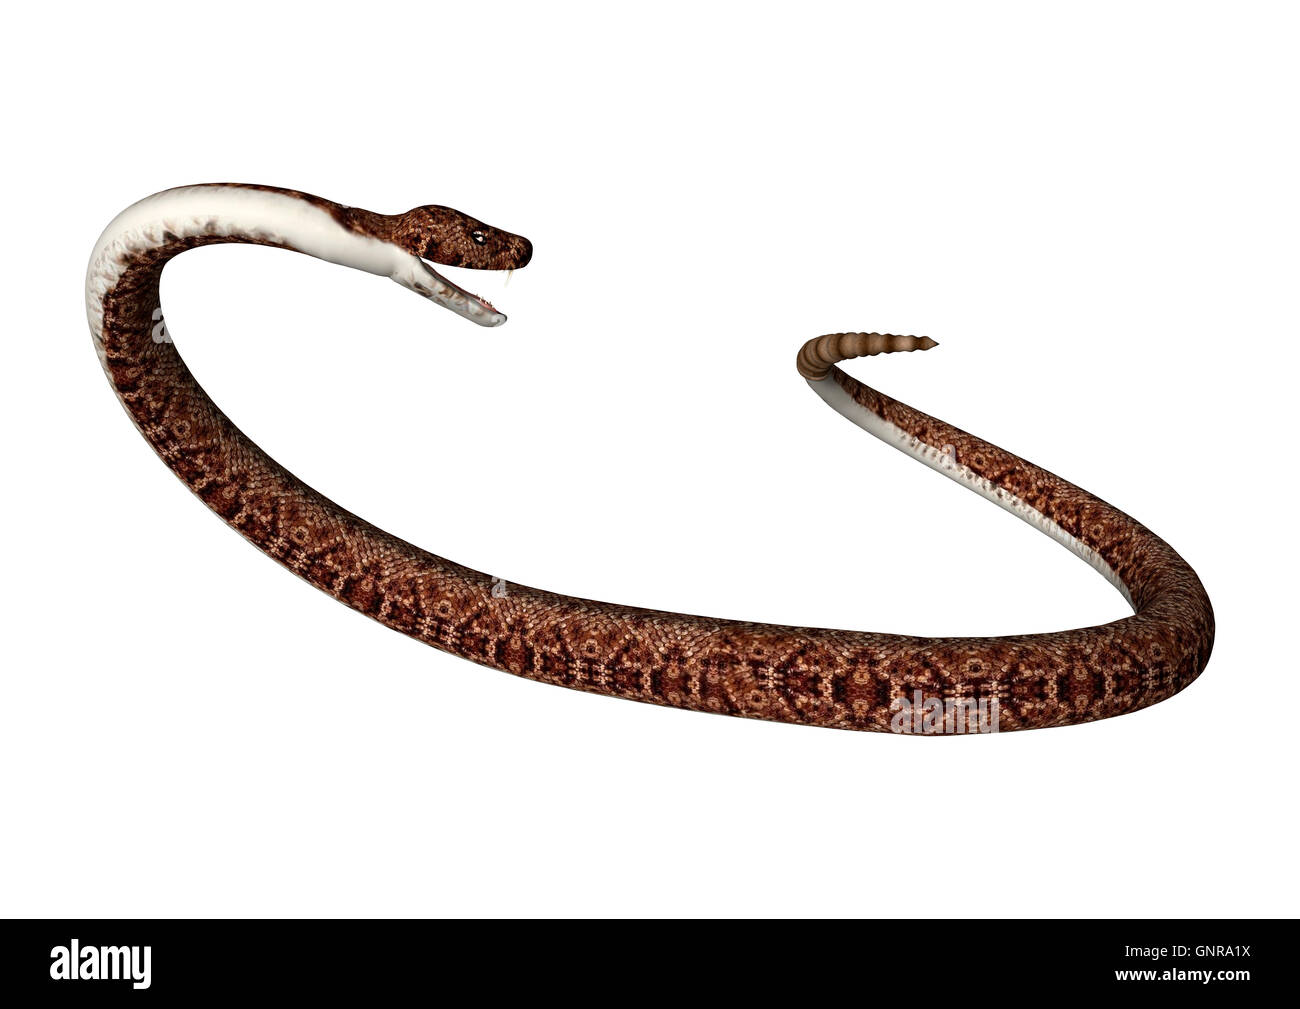 3D rendering of a rattlesnake isolated on white background Stock Photo